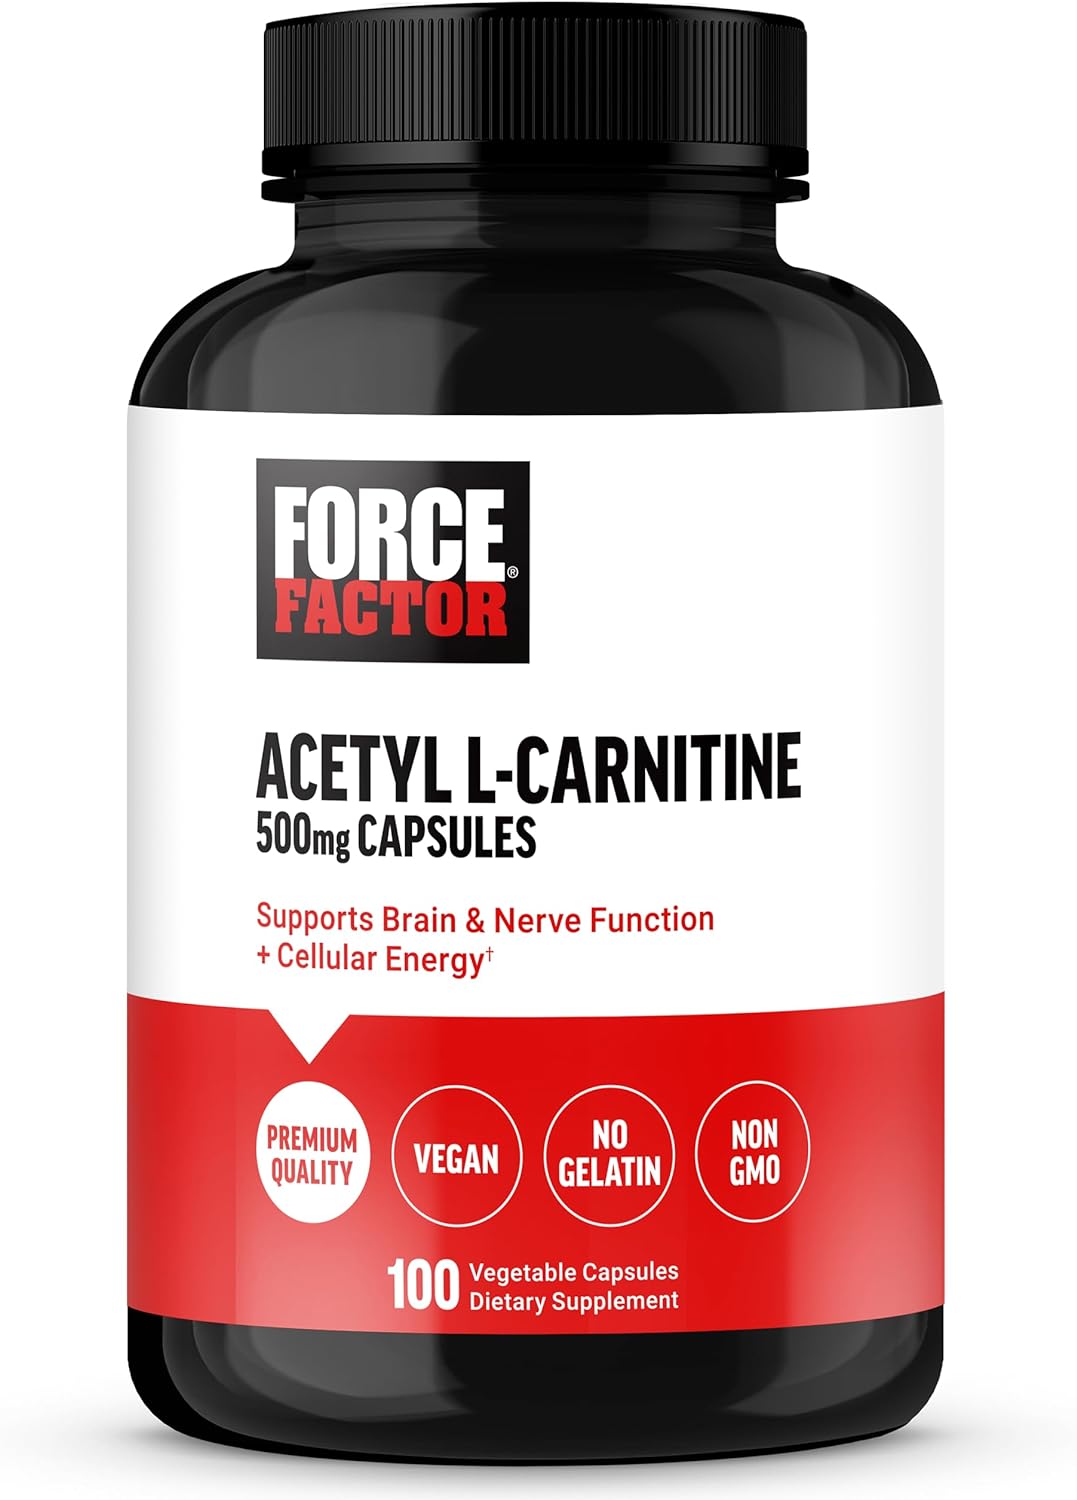 Force Factor Acetyl L-Carnitine Brain Supplement, Nerve Support Supplement, and Cellular Energy Booster, Acetyl L-Carnitine 500mg, Premium Quality, Vegan, Non-GMO, 100 Vegetable Capsules